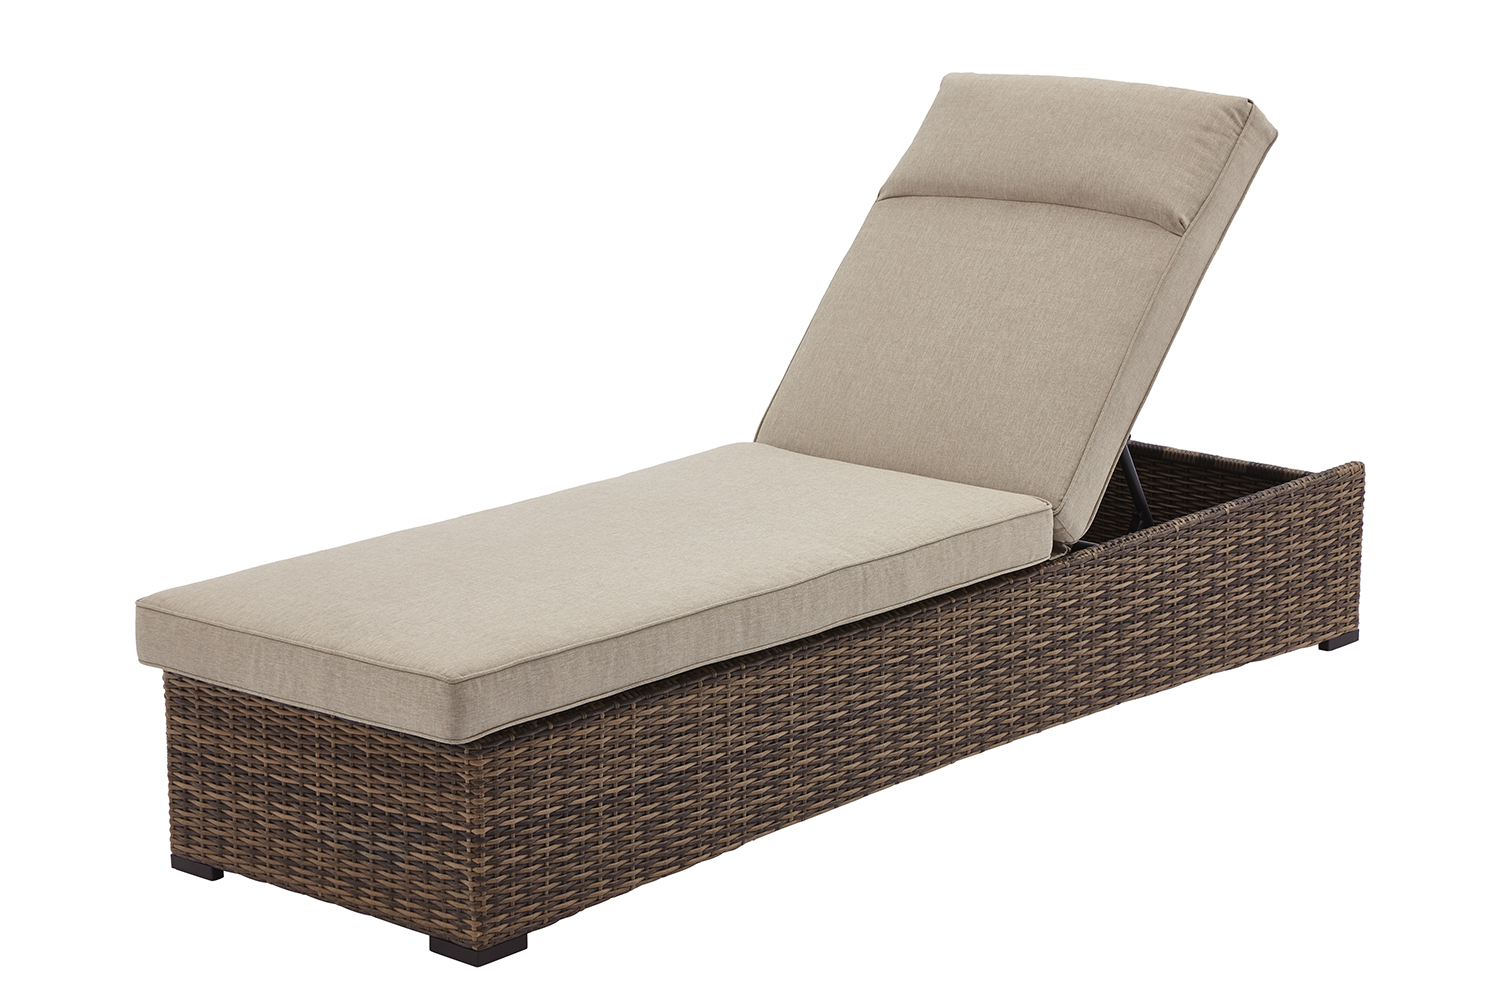 Better Homes & Gardens Hawthorne Park Outdoor Chaise Lounge - image 2 of 8